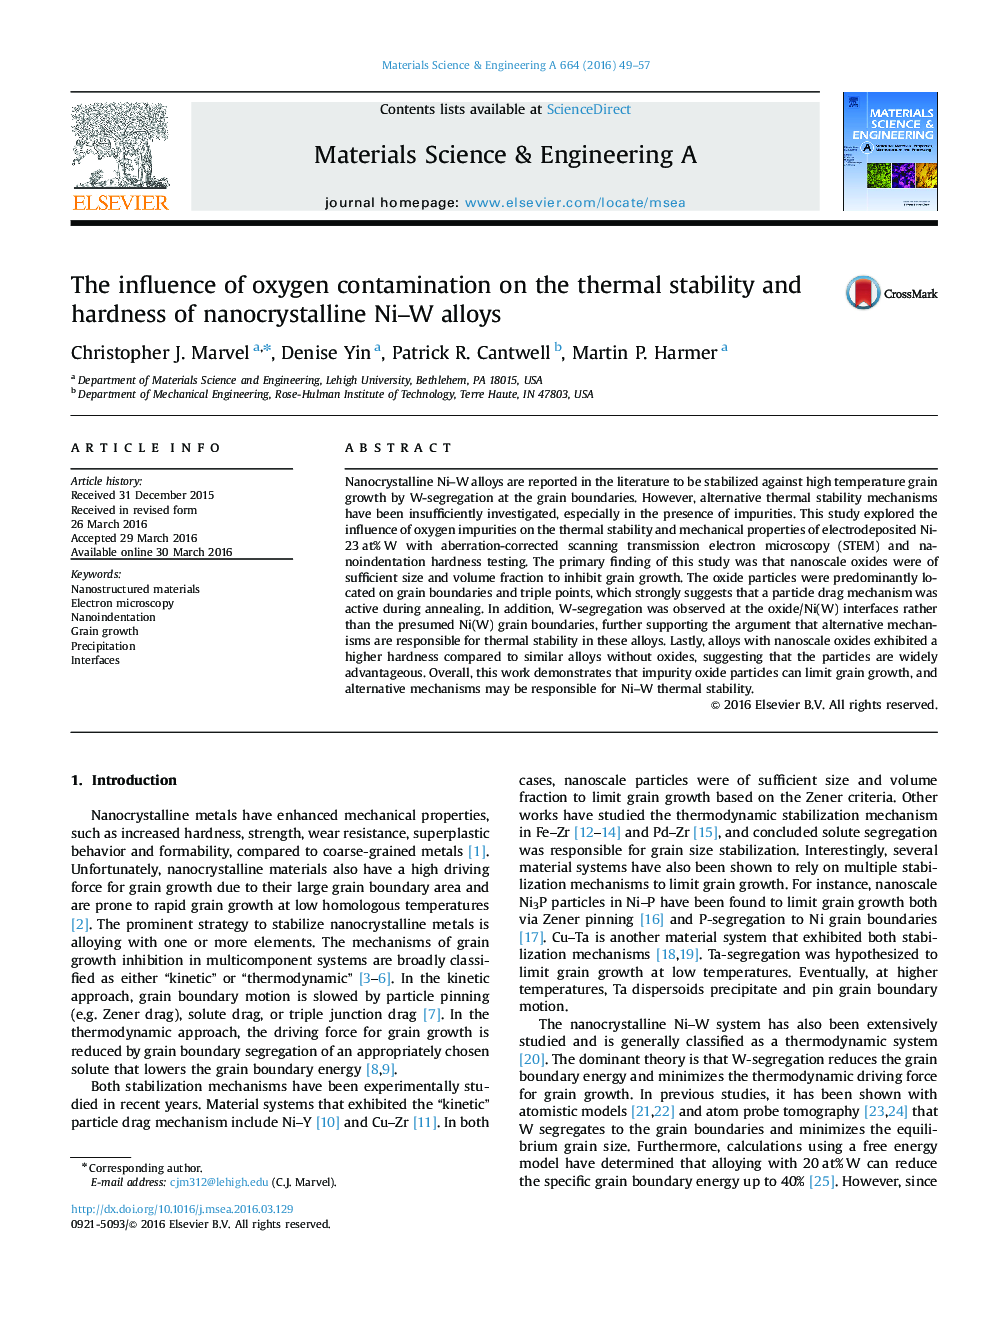 The influence of oxygen contamination on the thermal stability and hardness of nanocrystalline Ni-W alloys